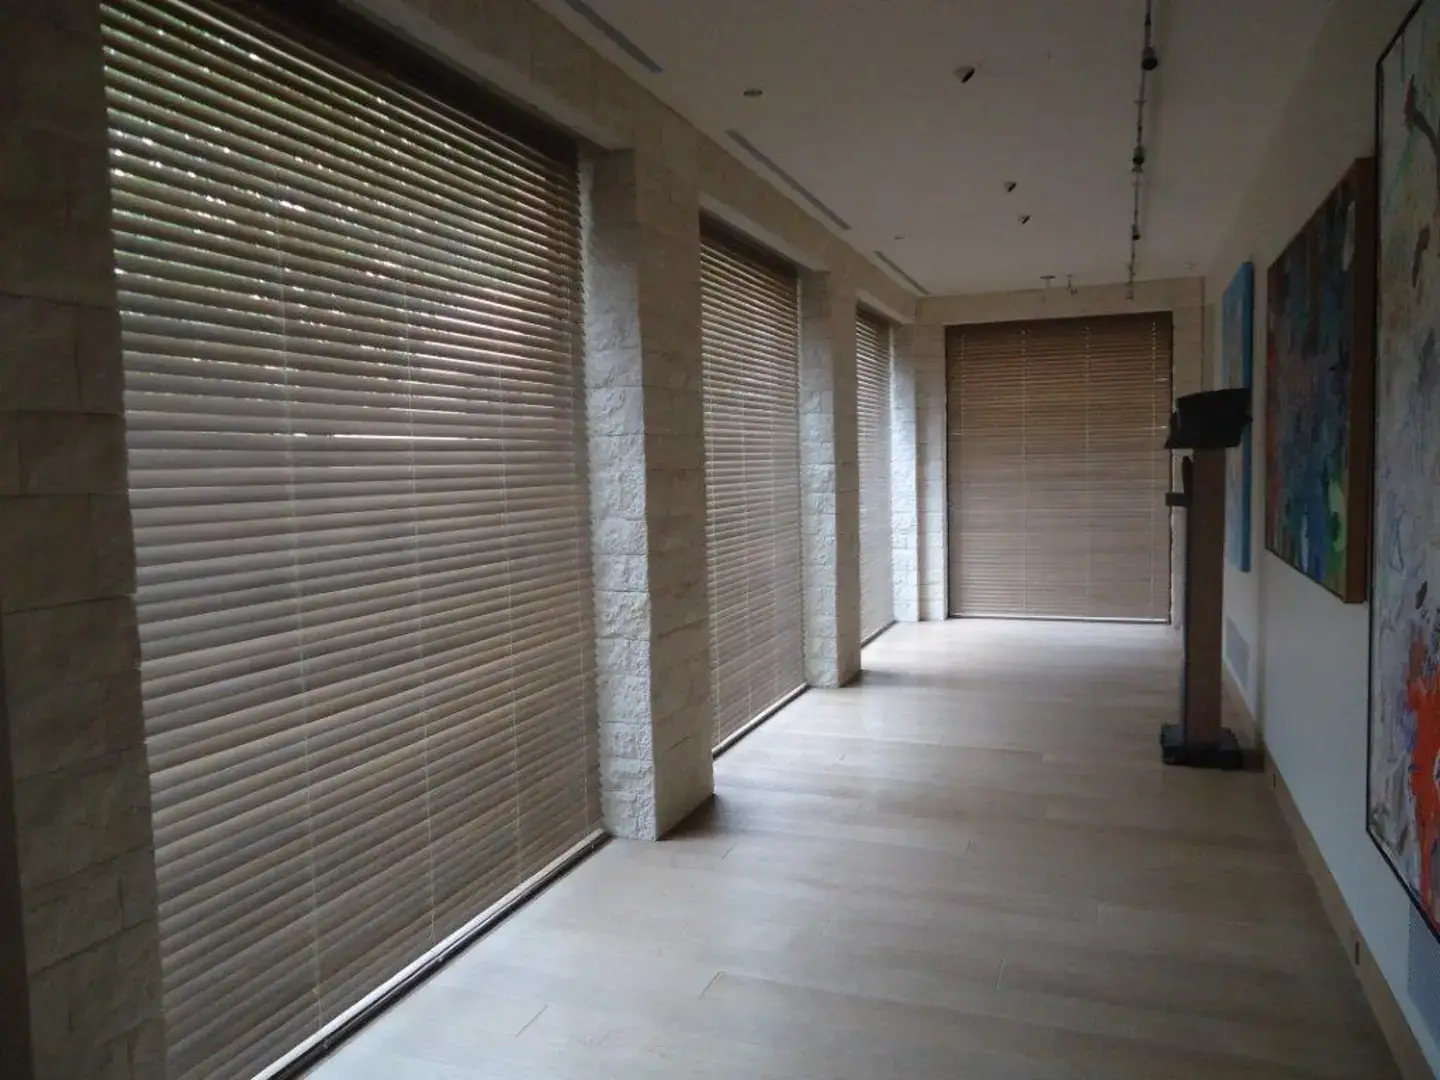 Large hallway with custom wooden blinds providing shade and privacy.